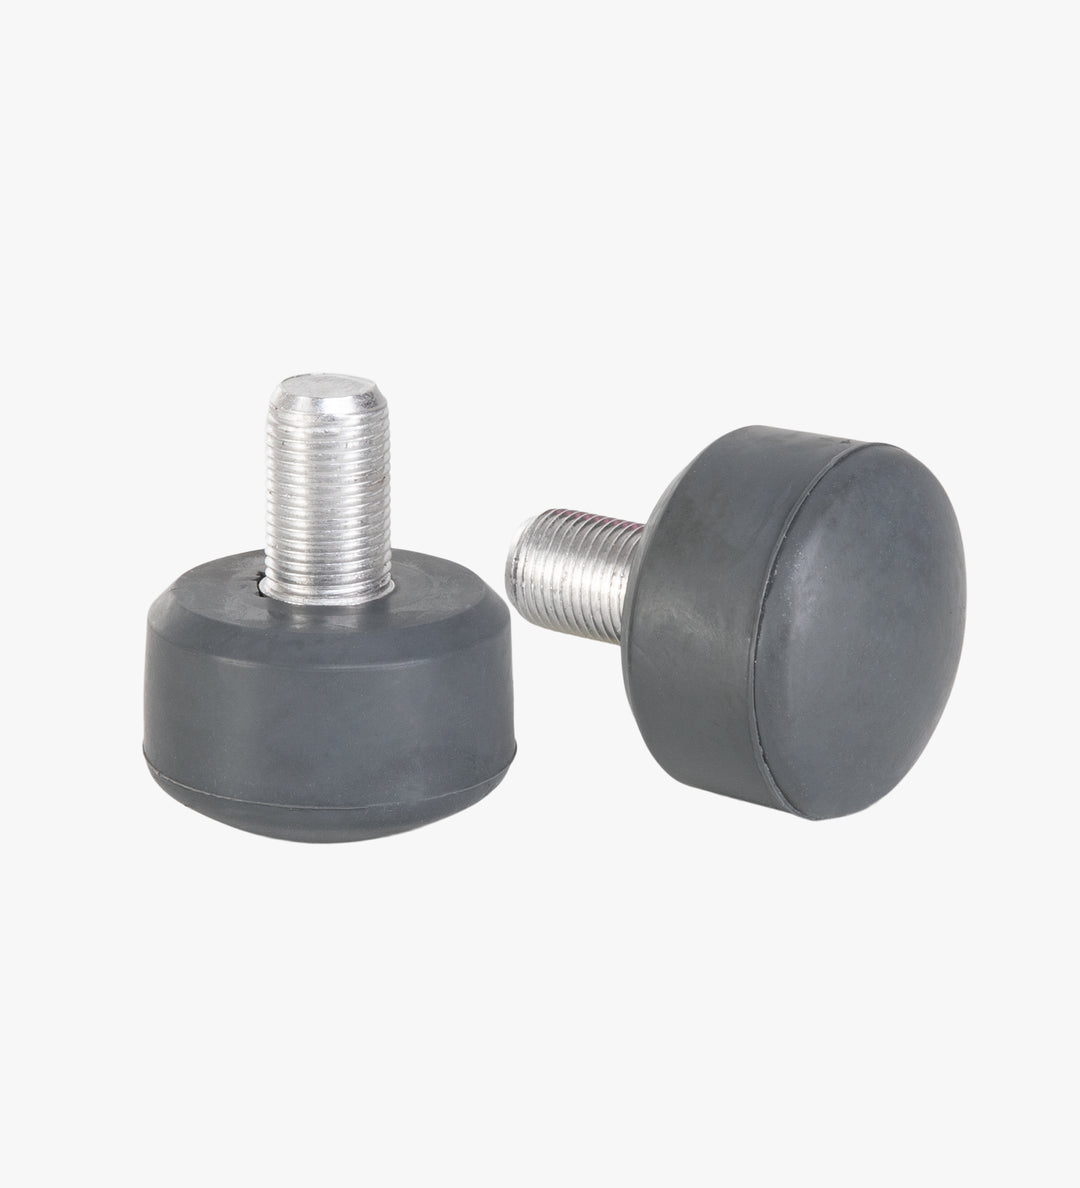 Cloudy Sky Adjustable C7 roller skate stoppers made from durable rubber and measure 47 by 35 mm. 